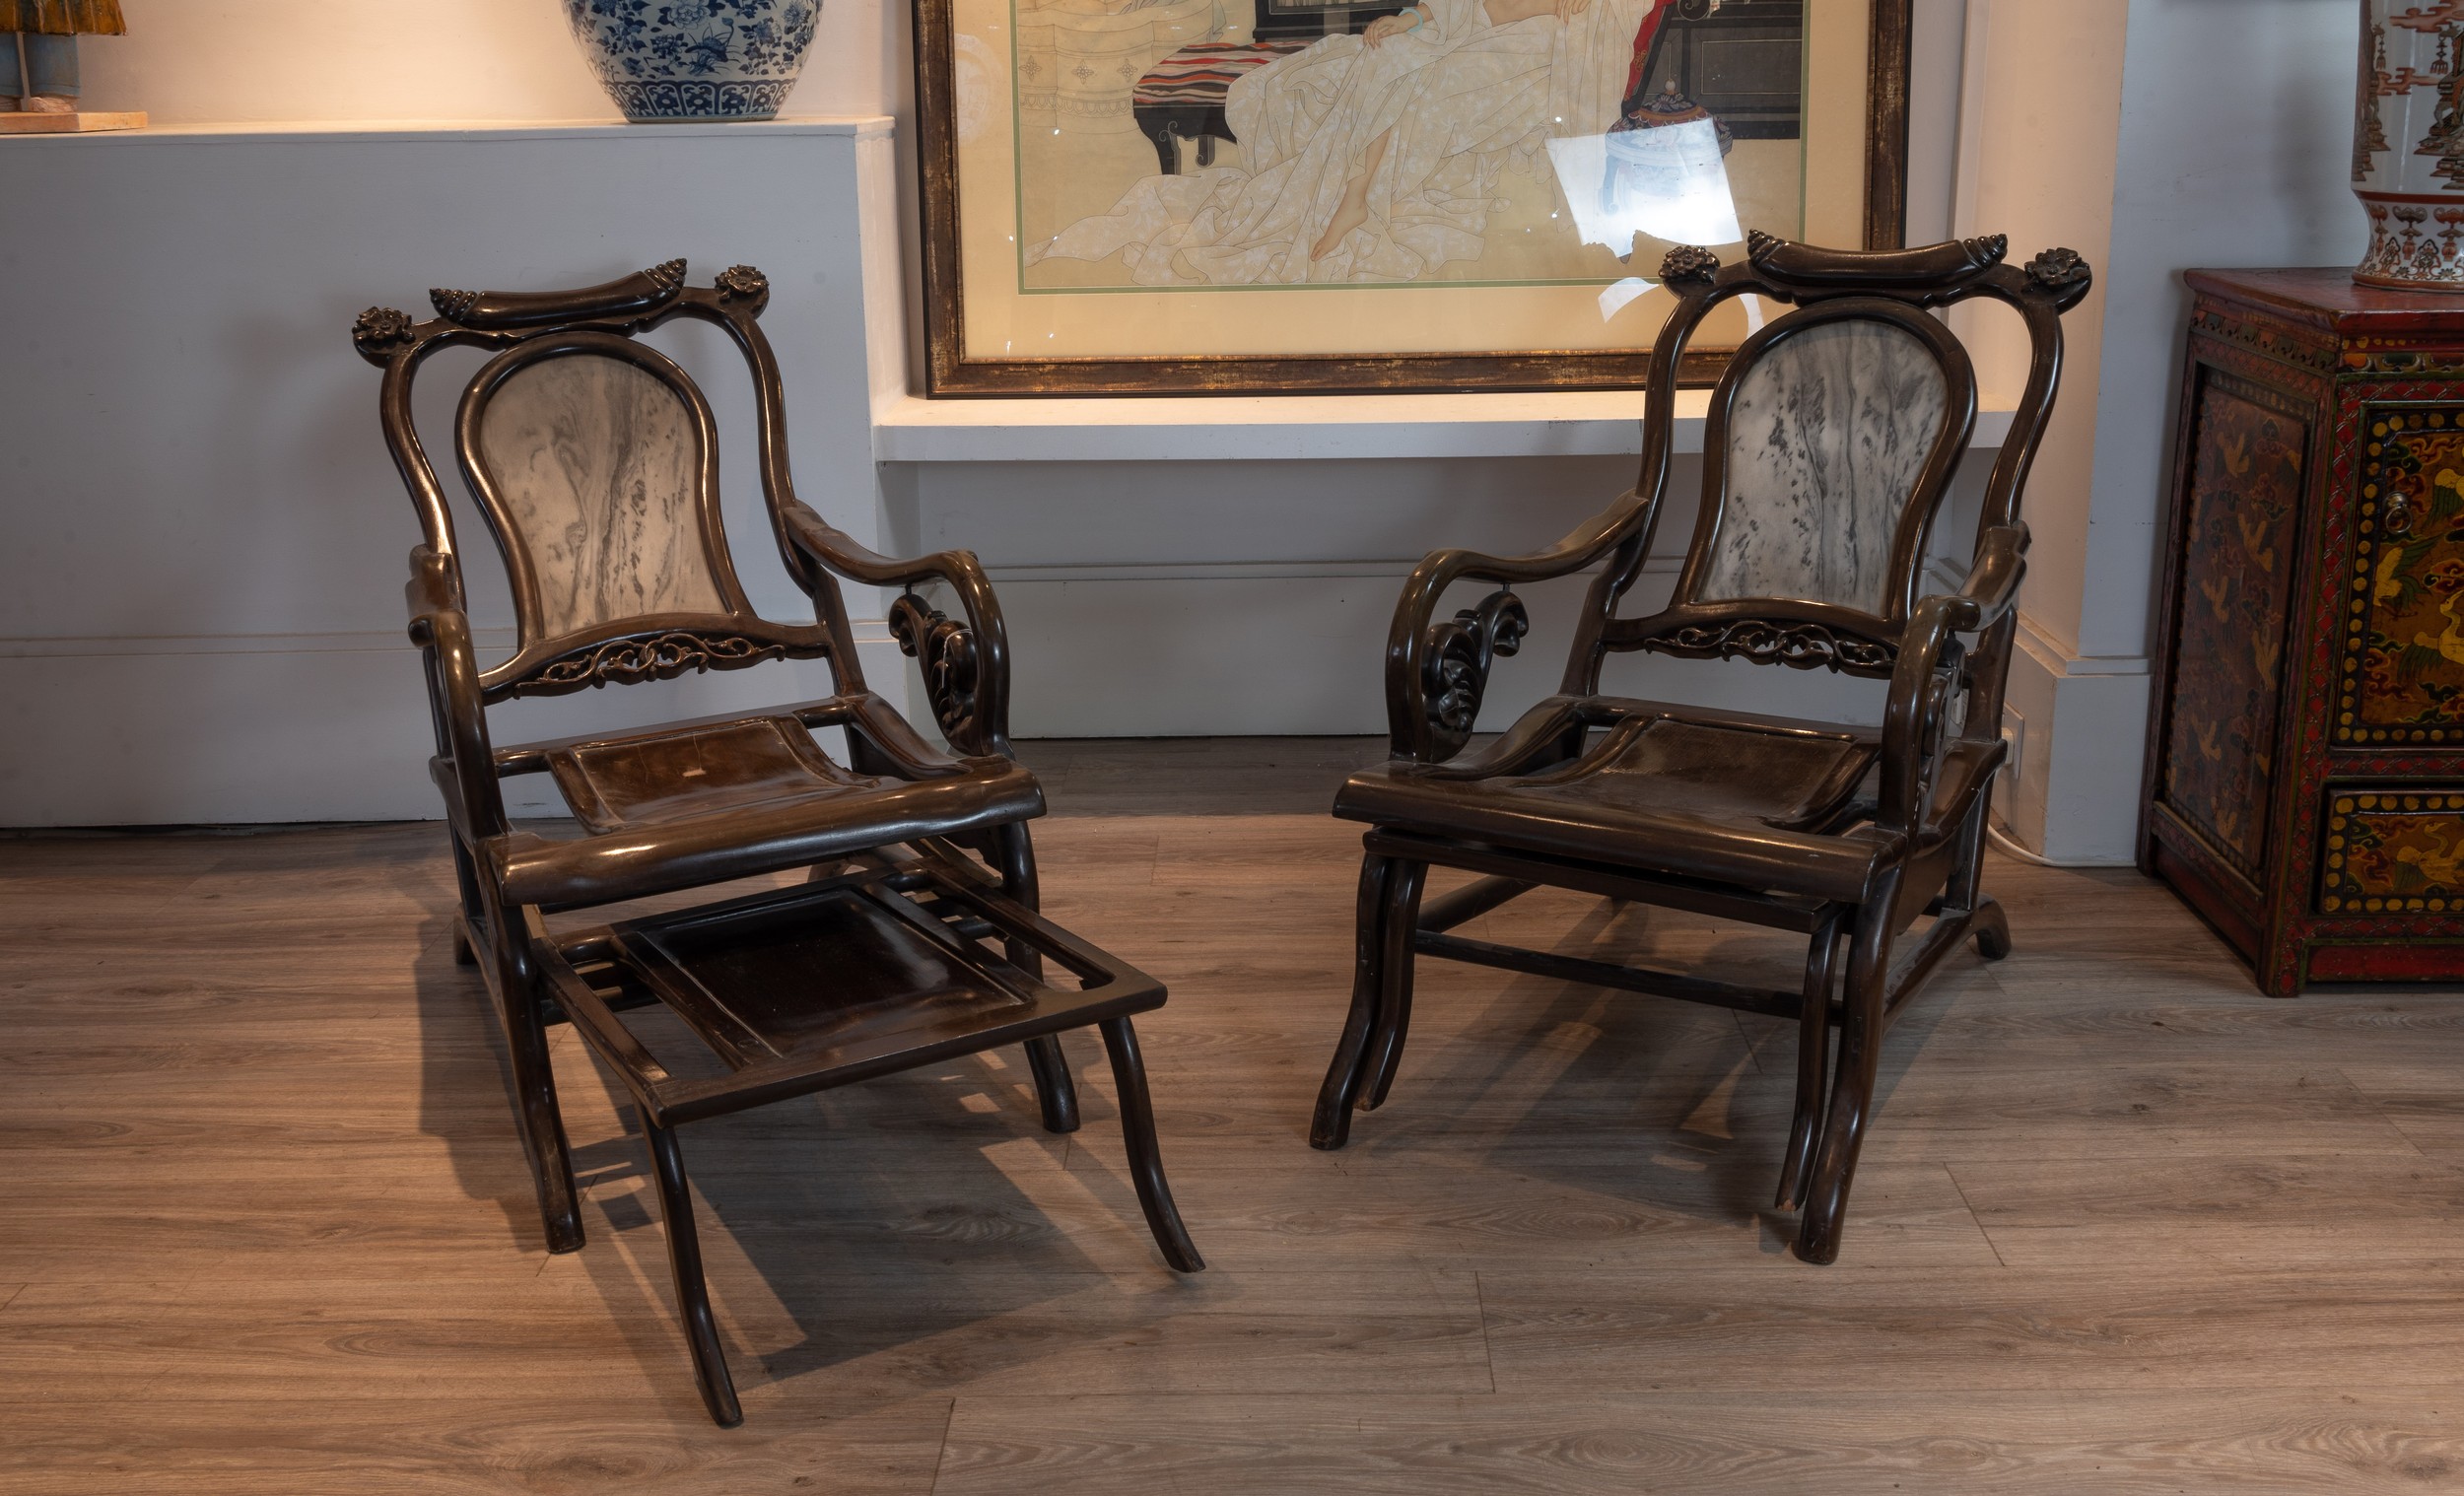 PAIR OF 20TH CENTURY CHINESE HARDWOOD 'MOON GAZING' CHAIRS, With floral carved headrests, Dali